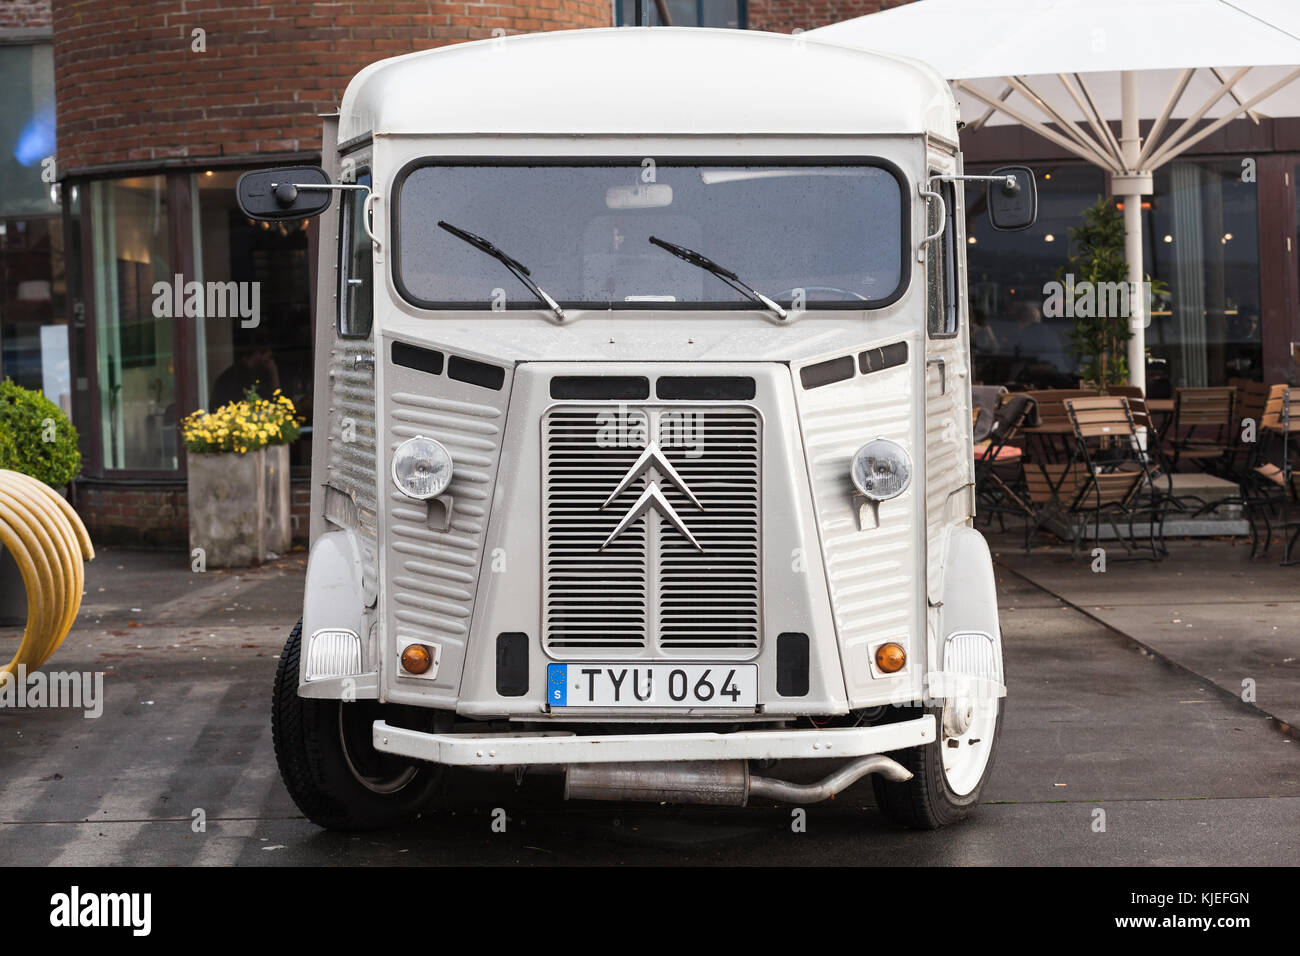 Bergen, Norway - November 14, 2017: White Citroen H Van, 1969 model stands on a roadside, close up front view Stock Photo